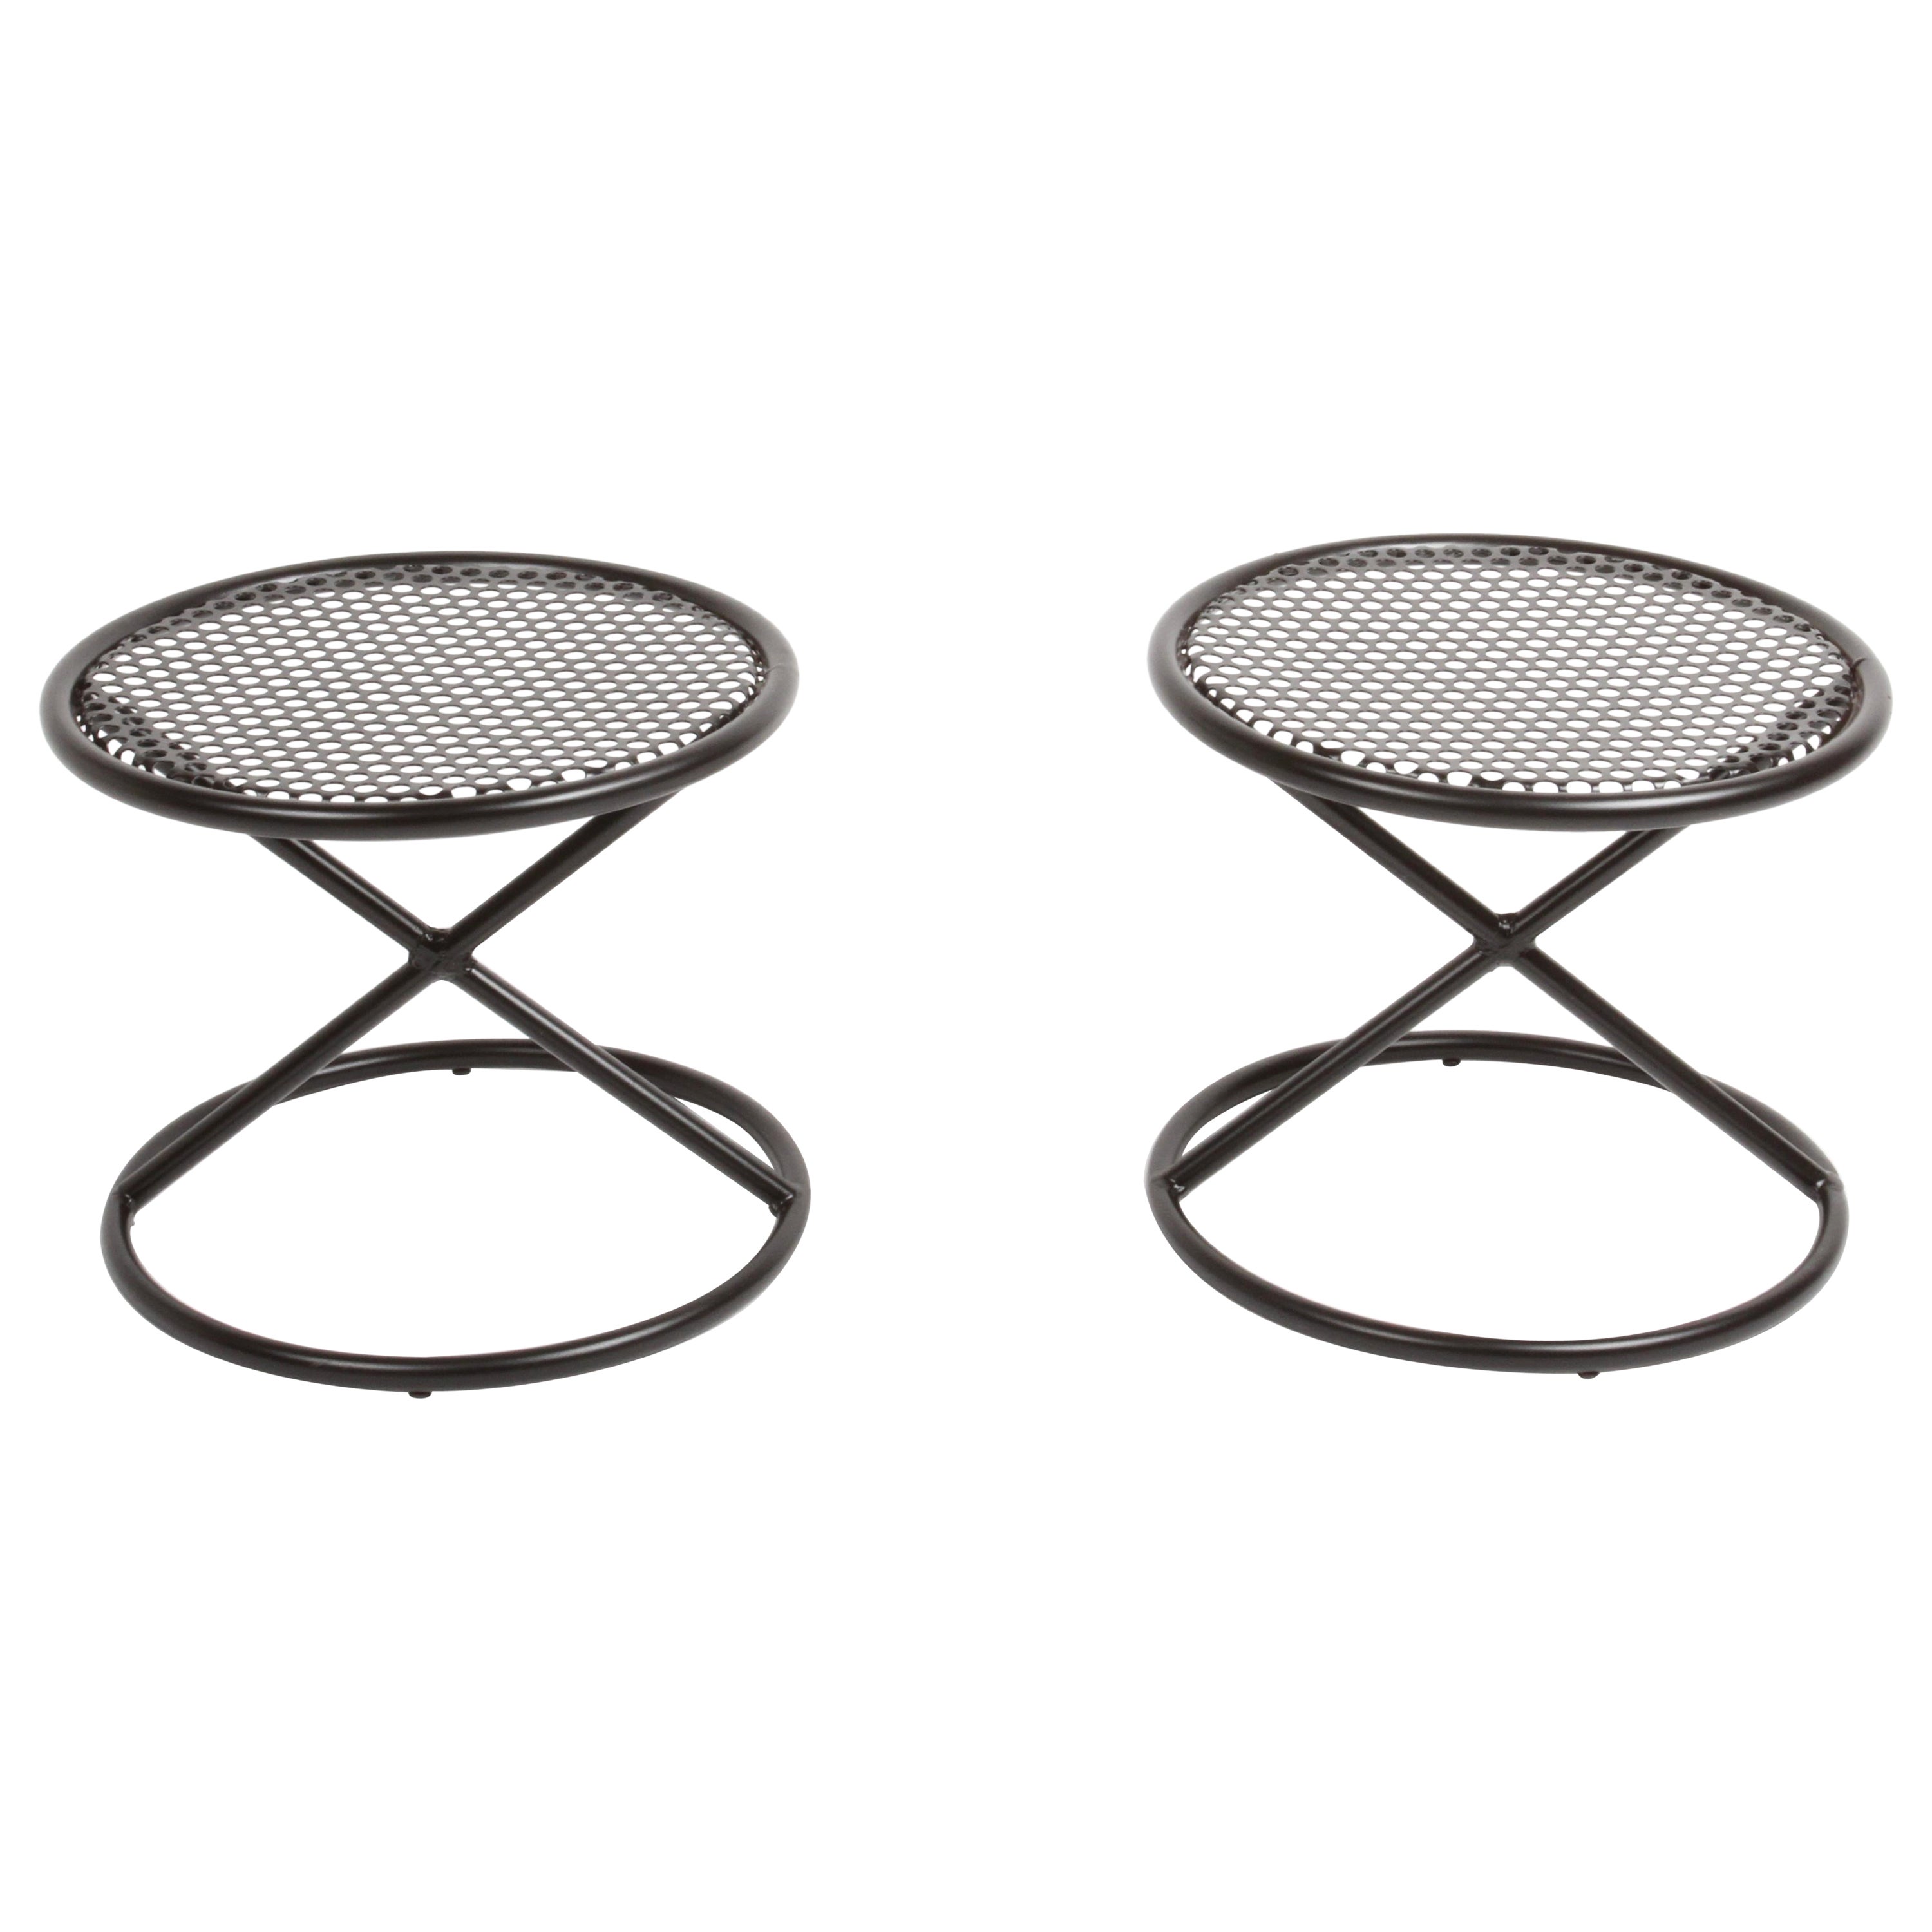 Mathieu Matégot Style Round Patio Side Tables with Perforated Tops & X Supports